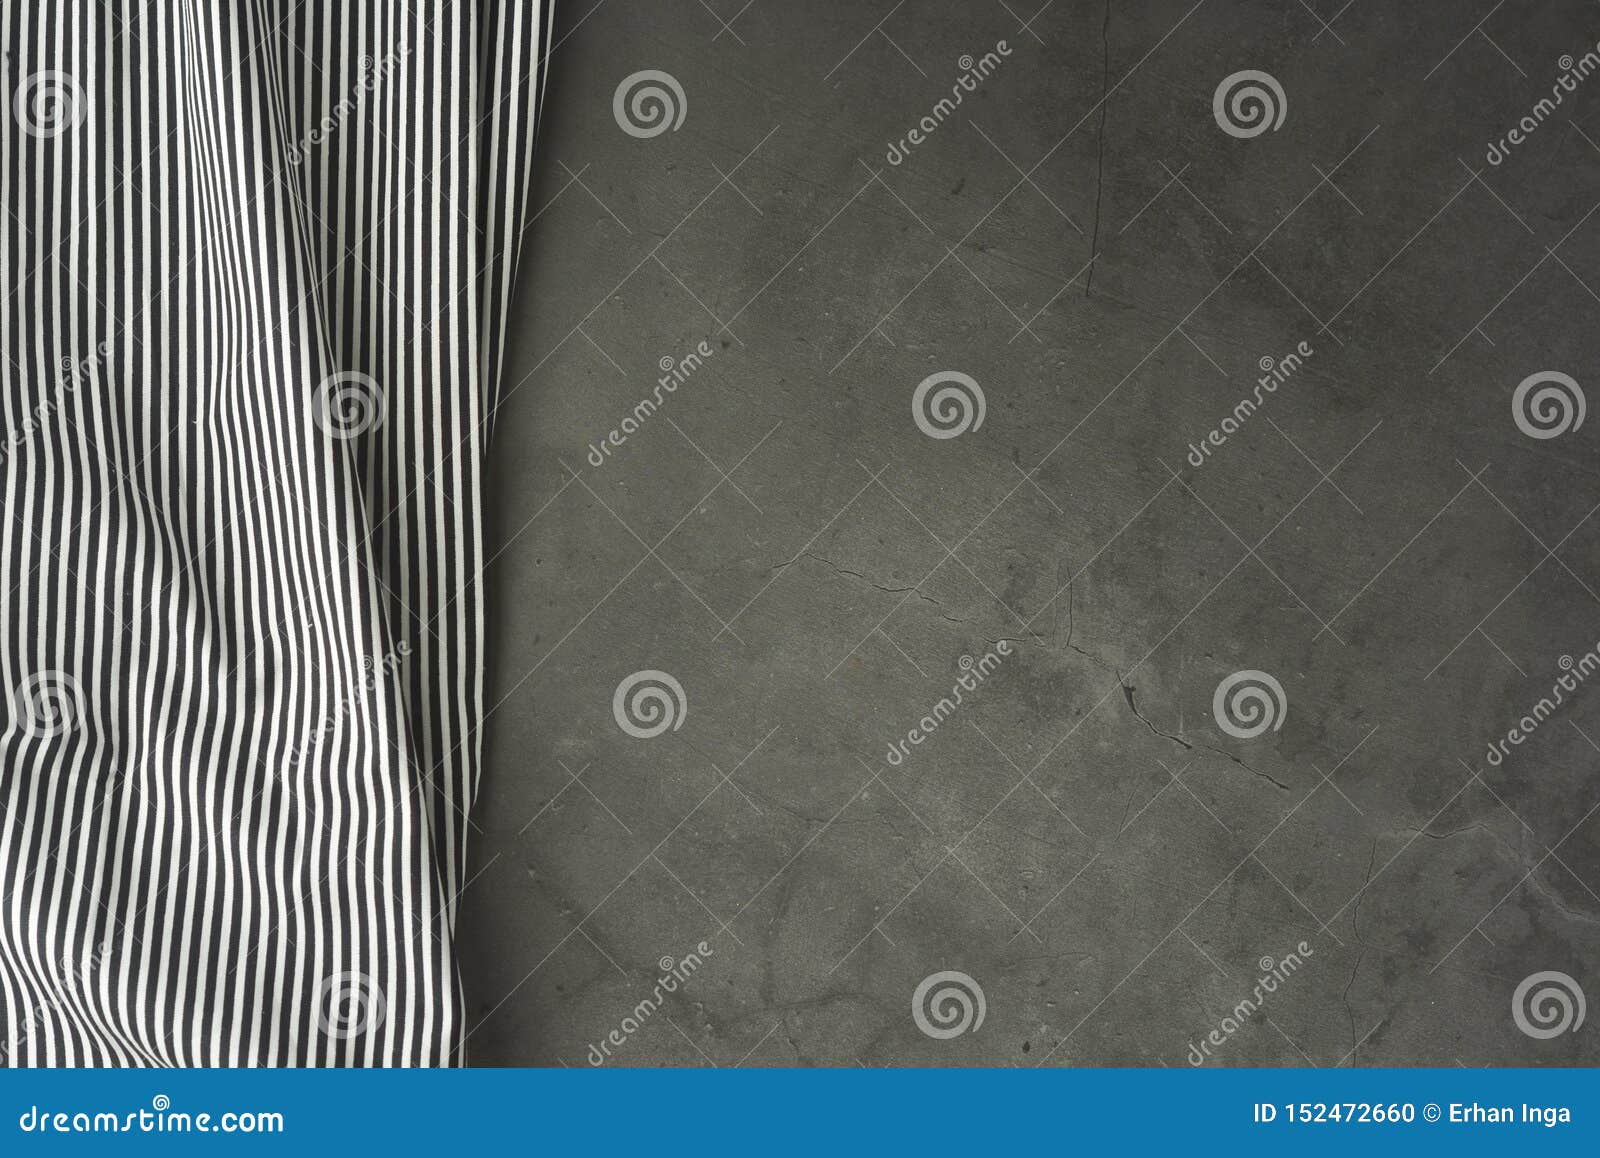 empty mockup for productor food or text. textured grey board with black and white fabric